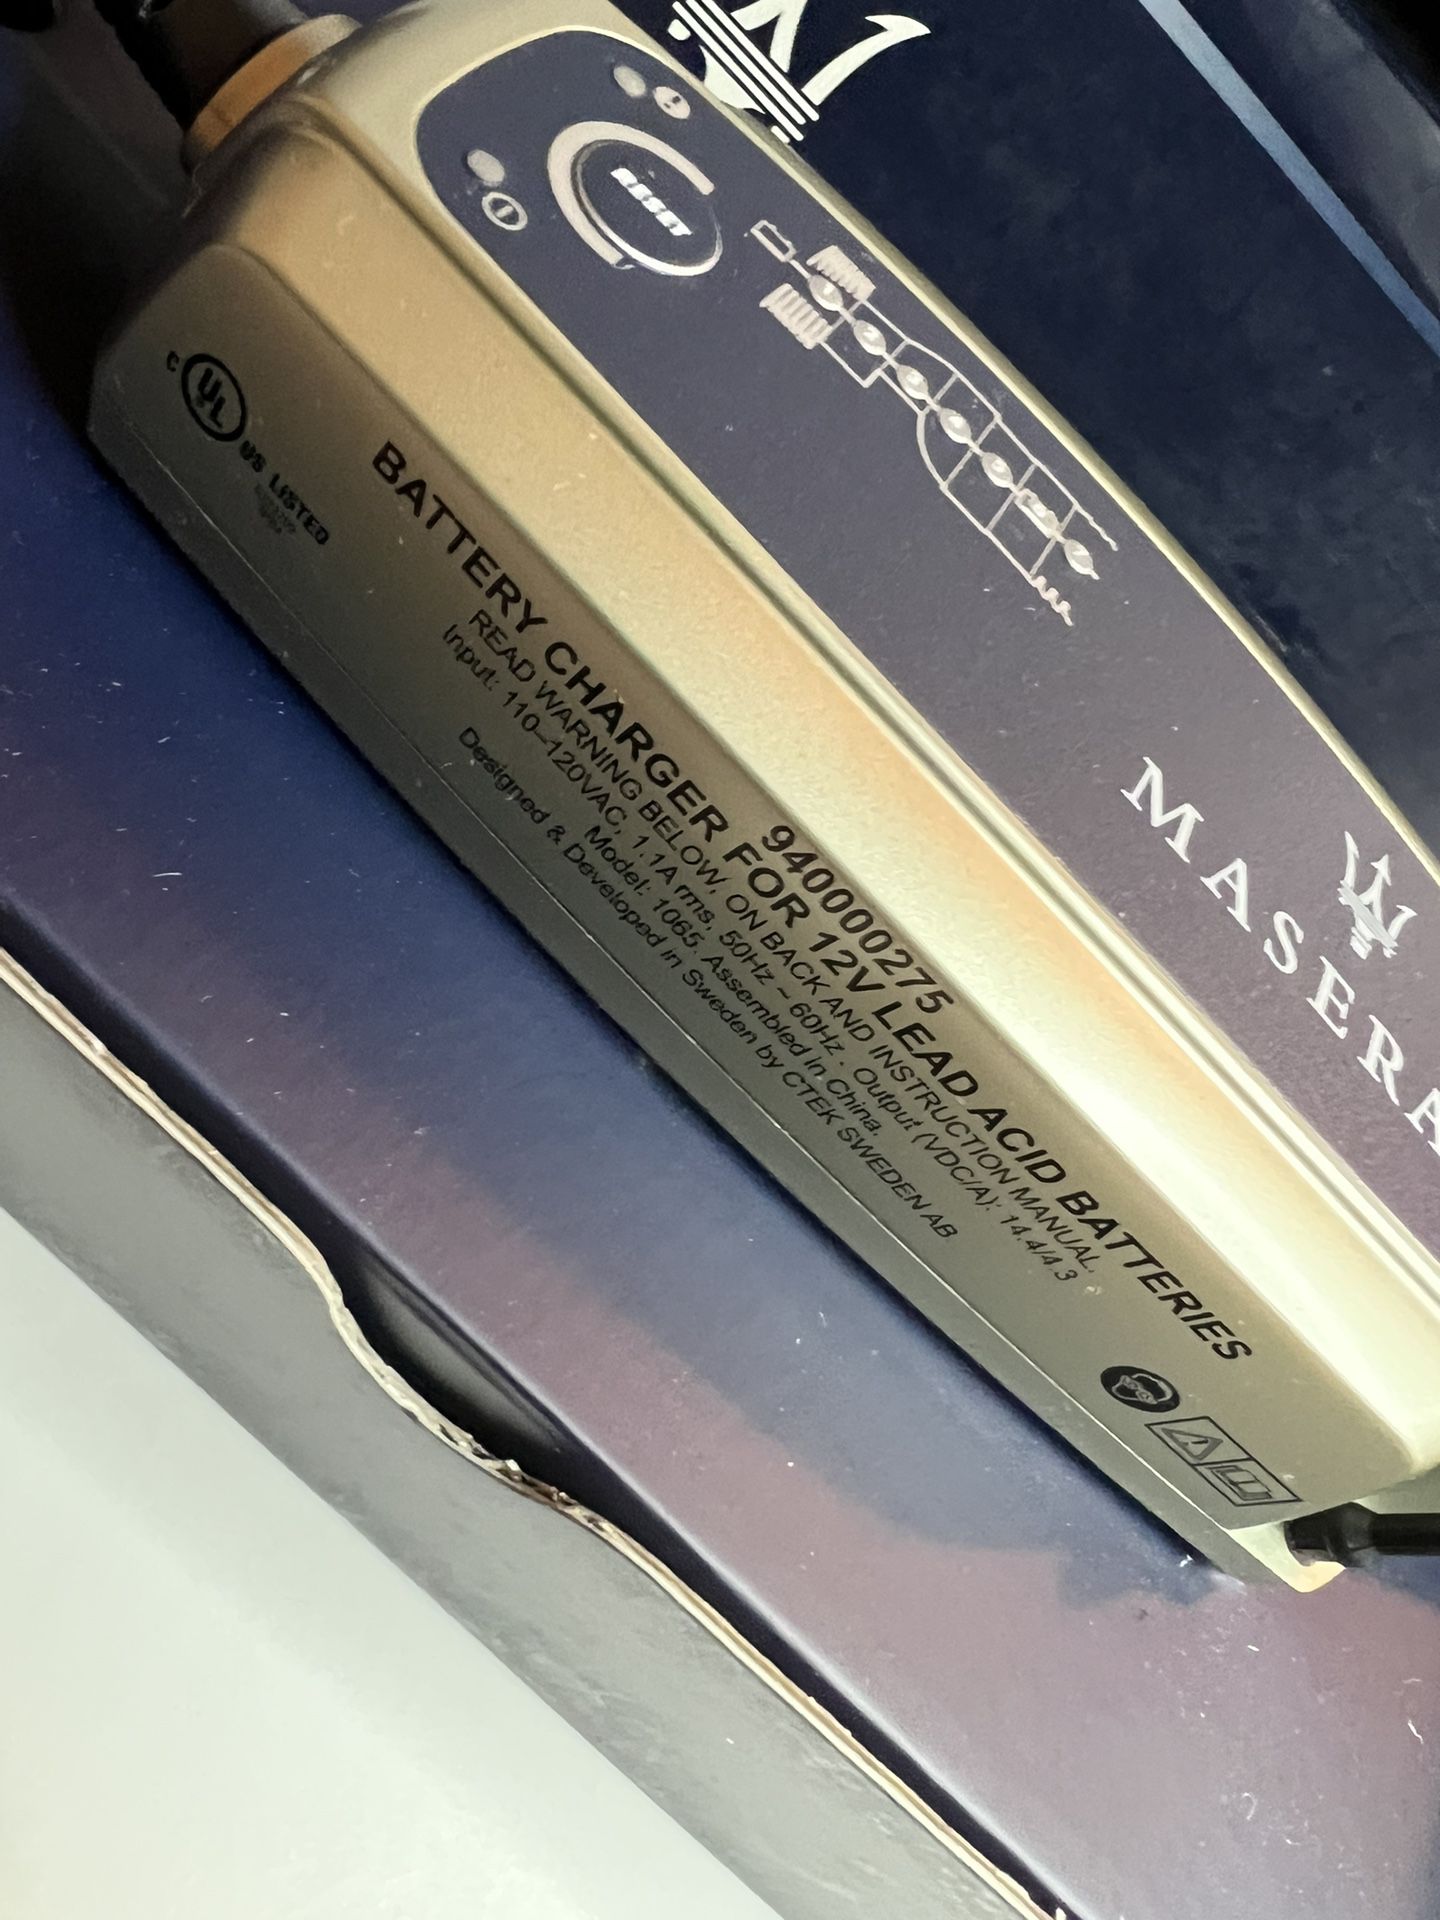 Brand New Maserati Genuine Accessories Battery Charger and Conditioner (contact info removed)75